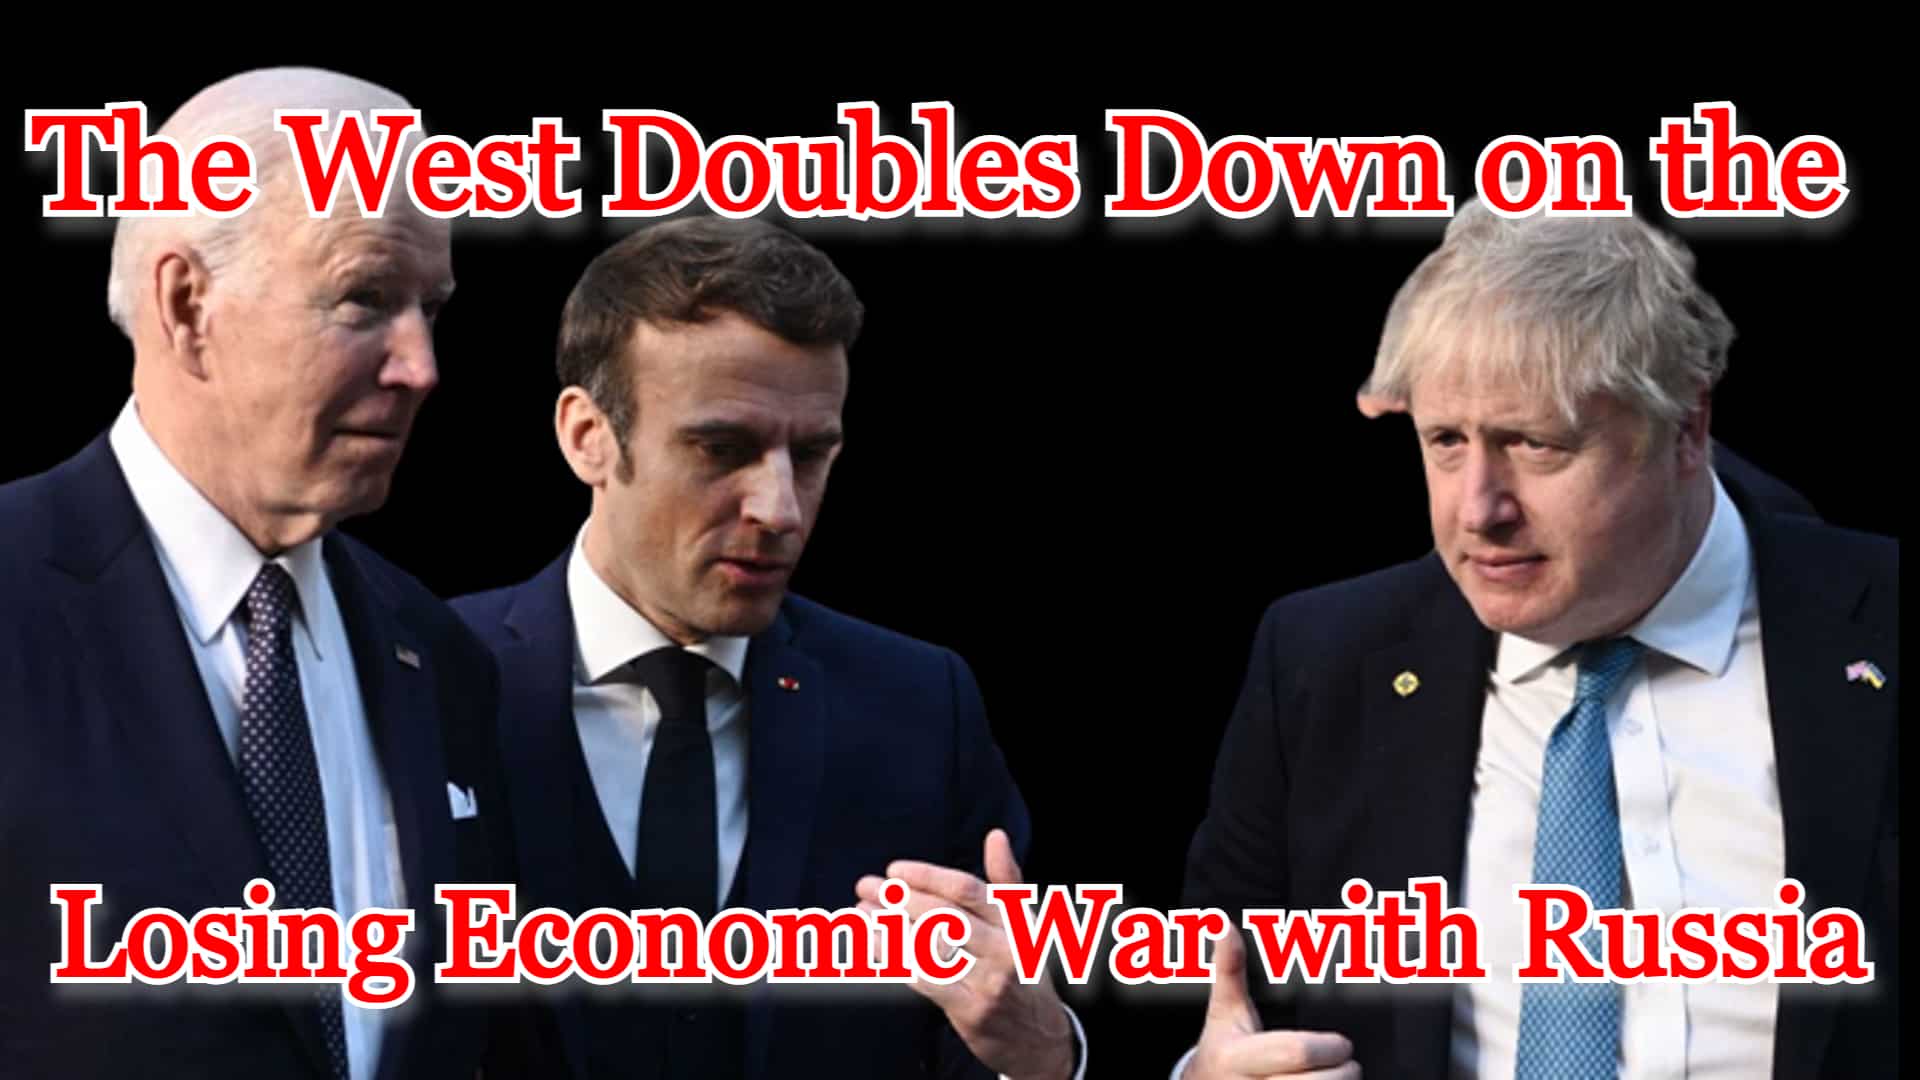 COI #320: The West Doubles Down on the Losing Economic War with Russia